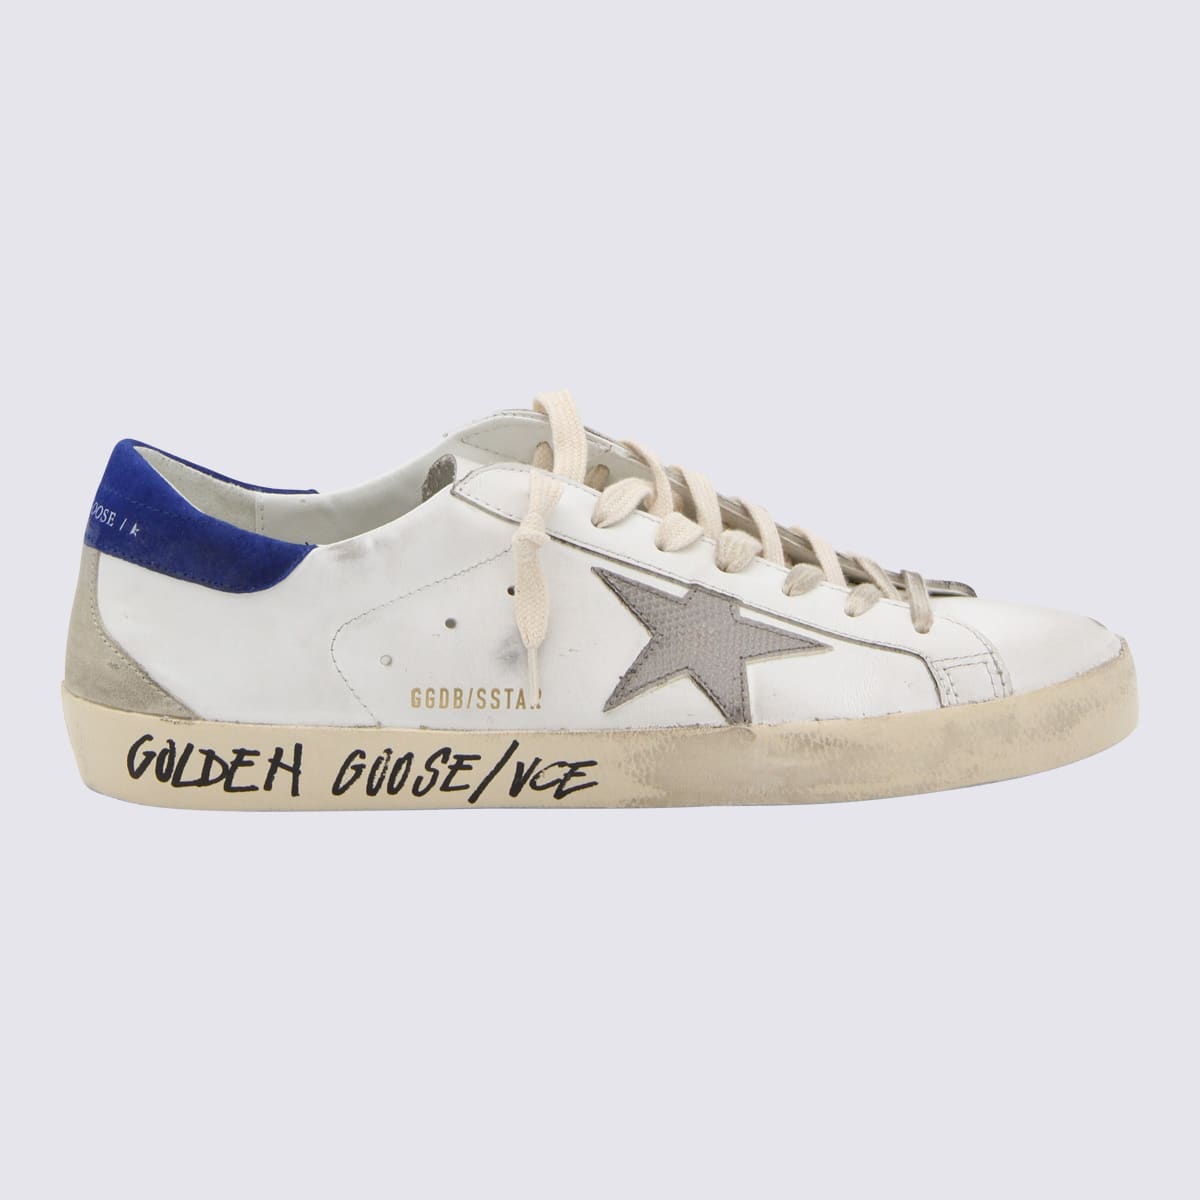 GOLDEN GOOSE WHITE AND BLUE LEATHER SNEAKERS